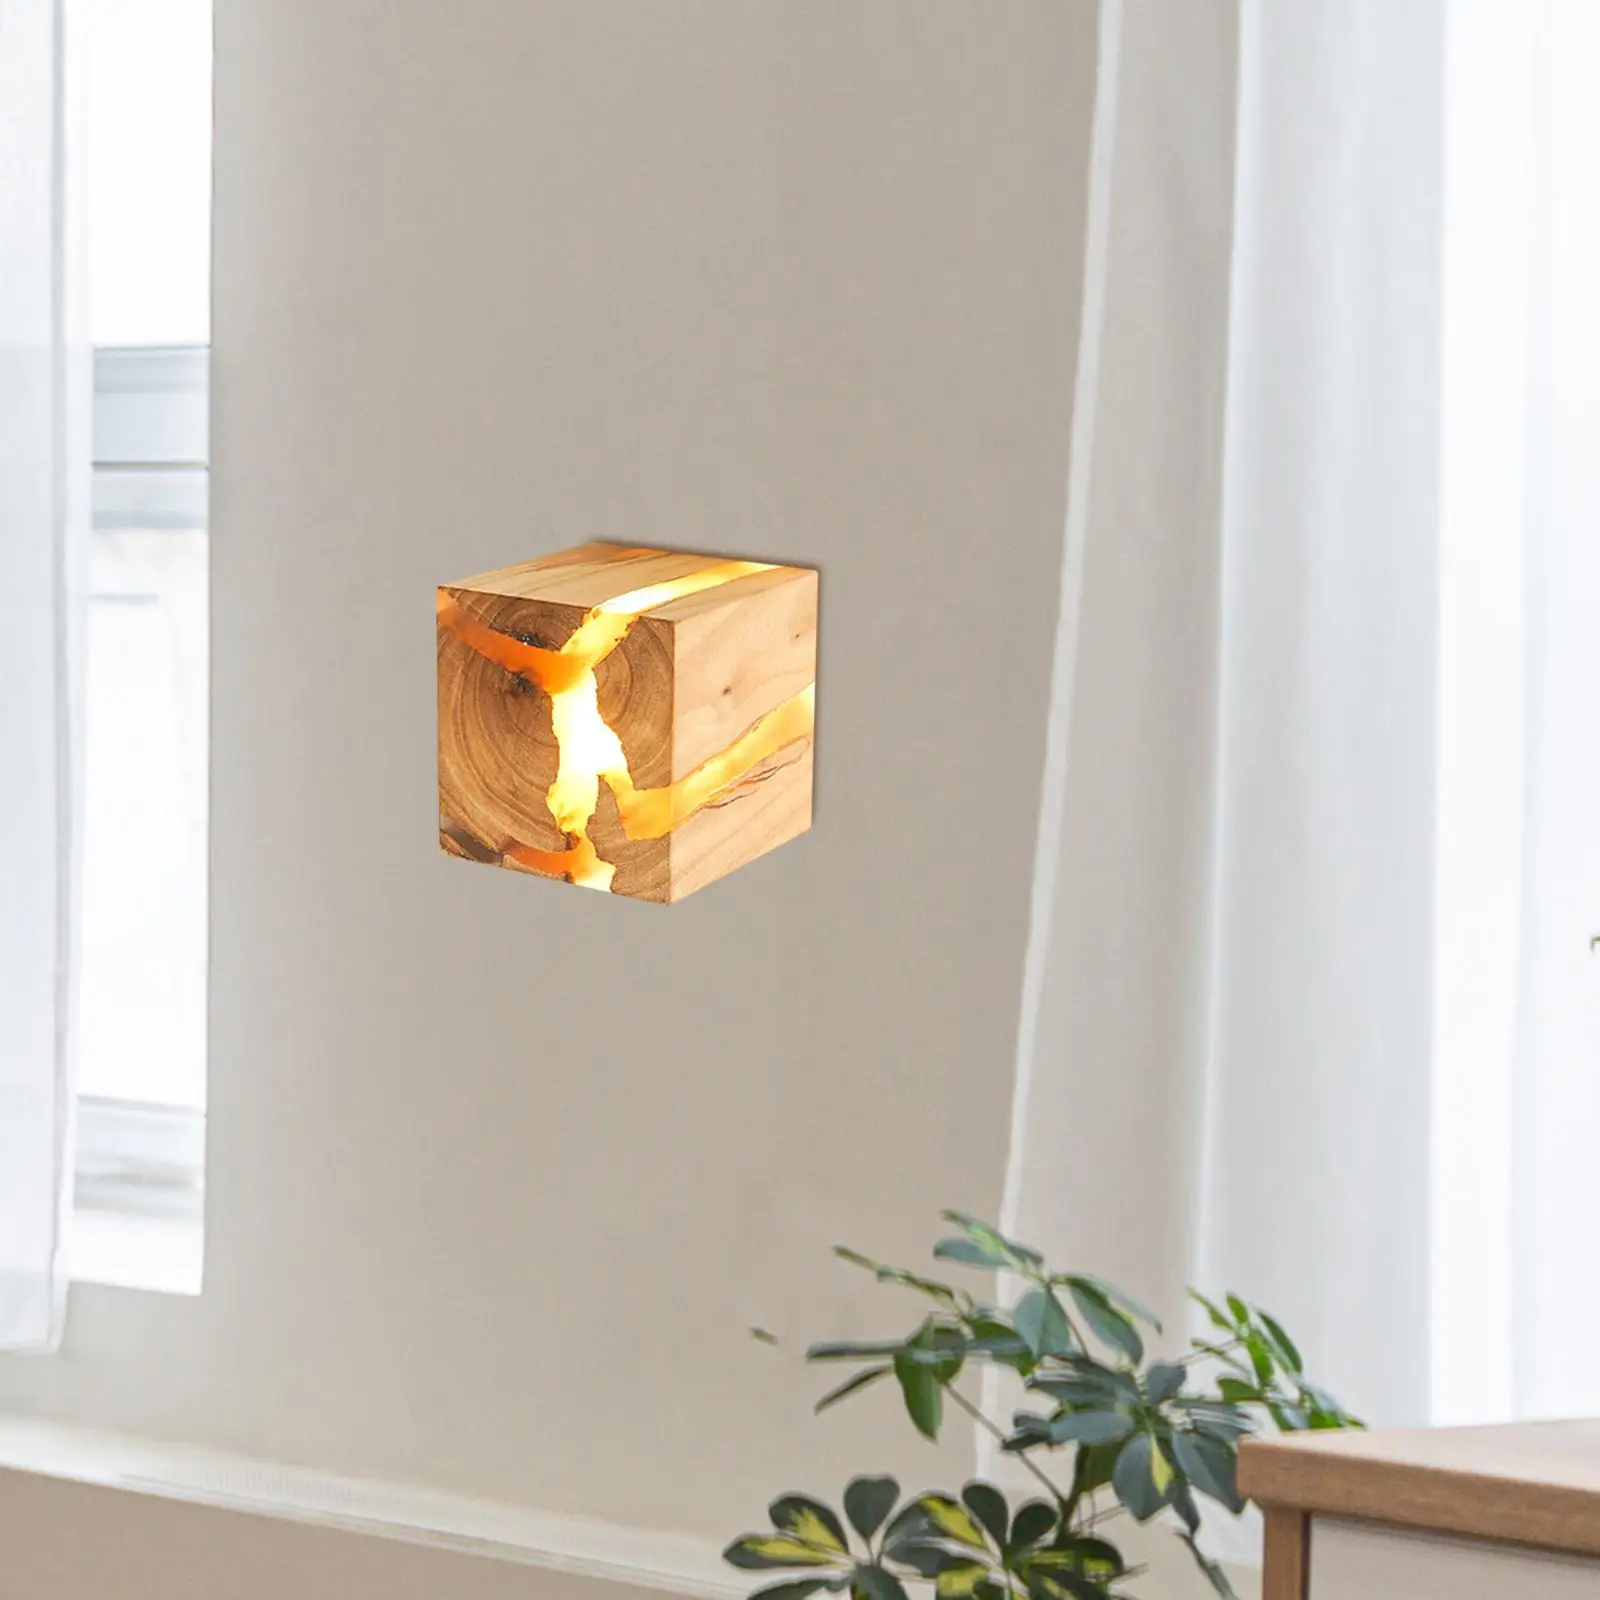 Wall Light Fashionable Decorative Creative Lights 5W Photo Prop LED Square Bedside Lamp for Living Room Cafe houses hotels Decor